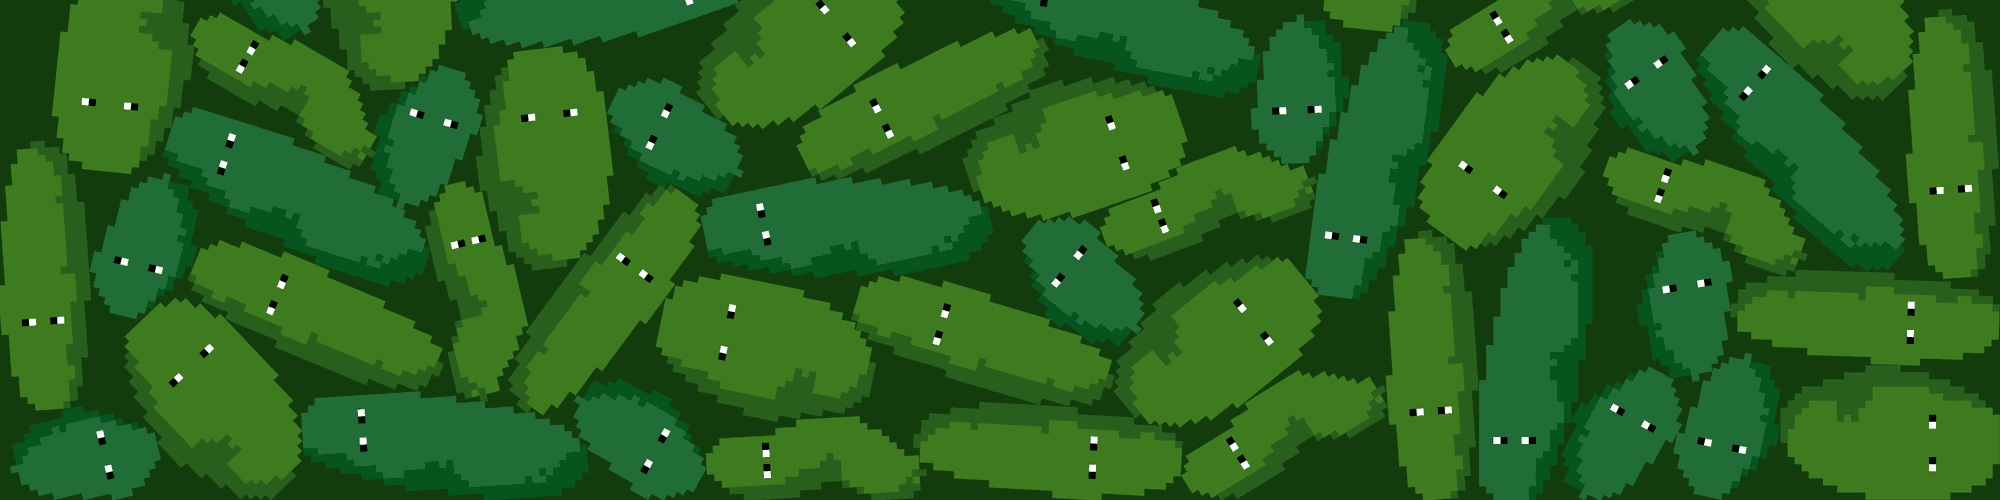 Pixelated Pickle People